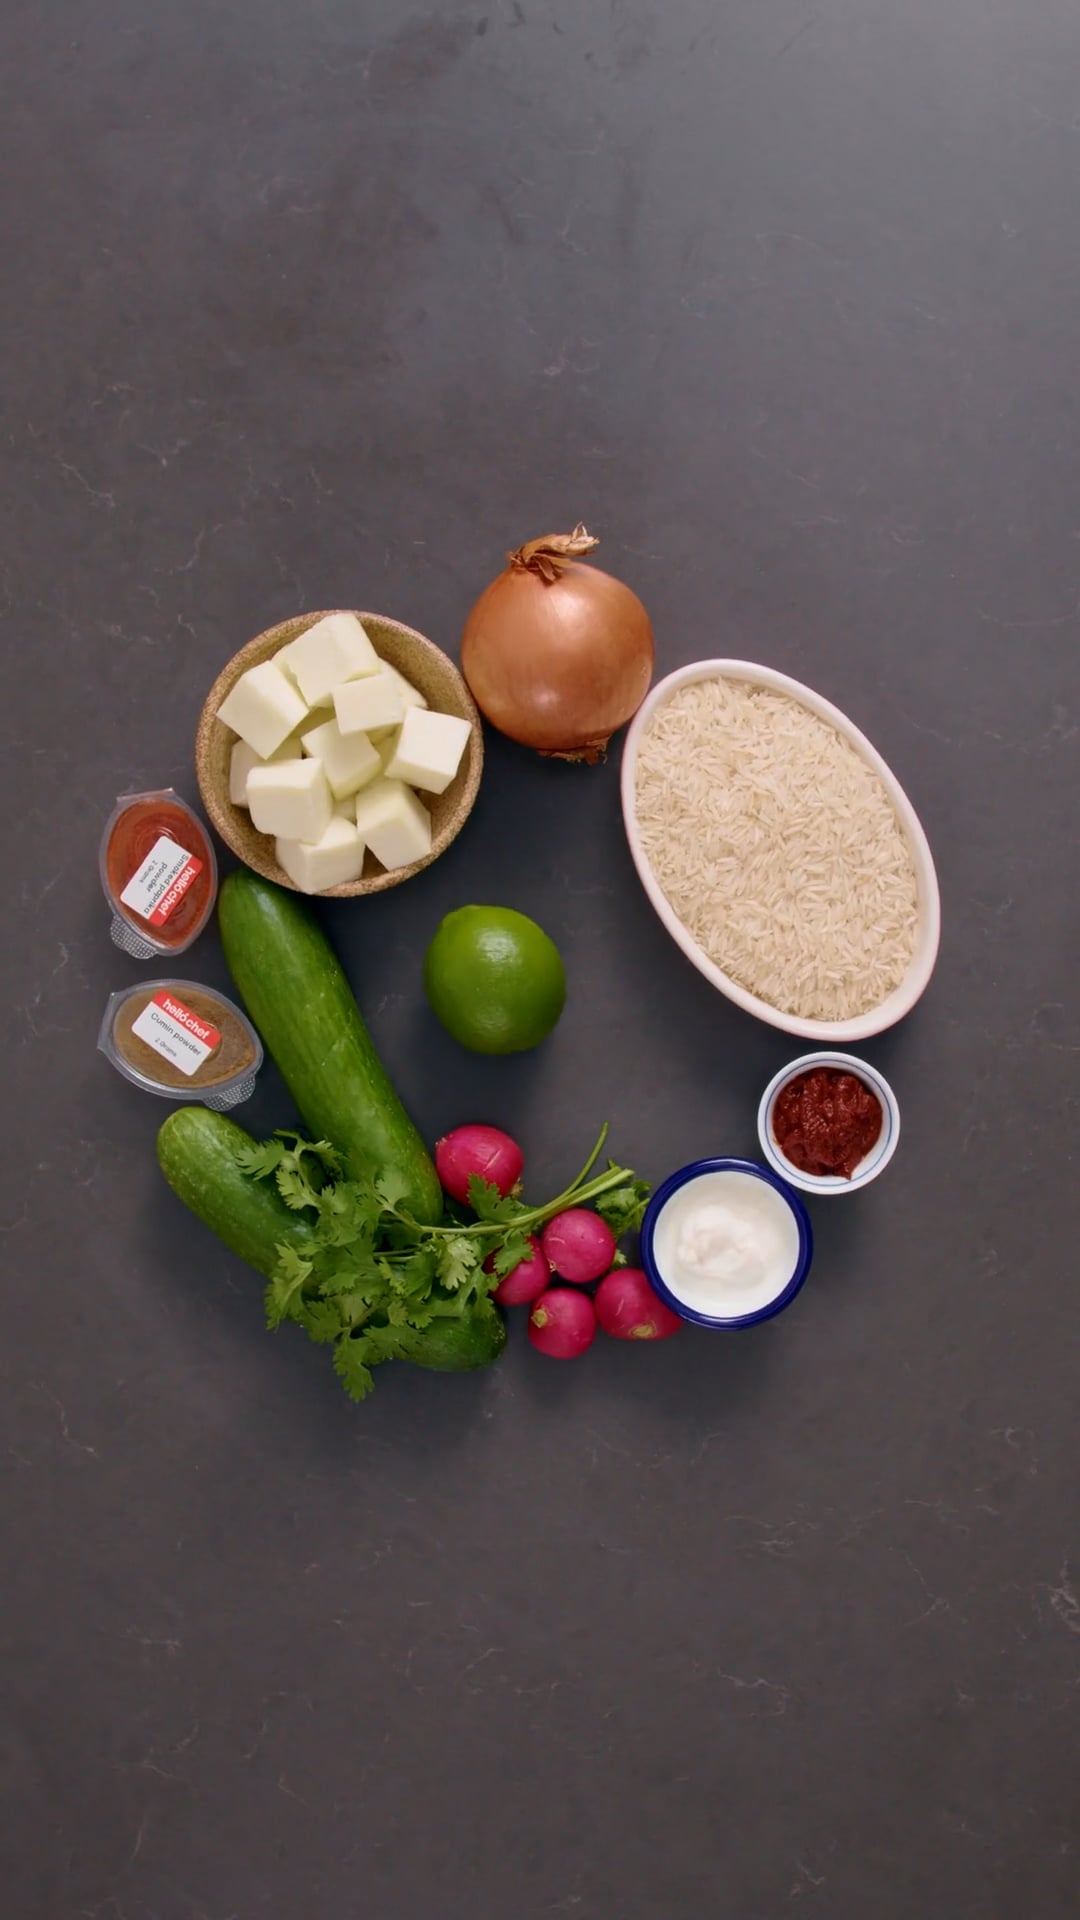 Featured image for “Unbox Paneer Tikka Masala – Social Video”